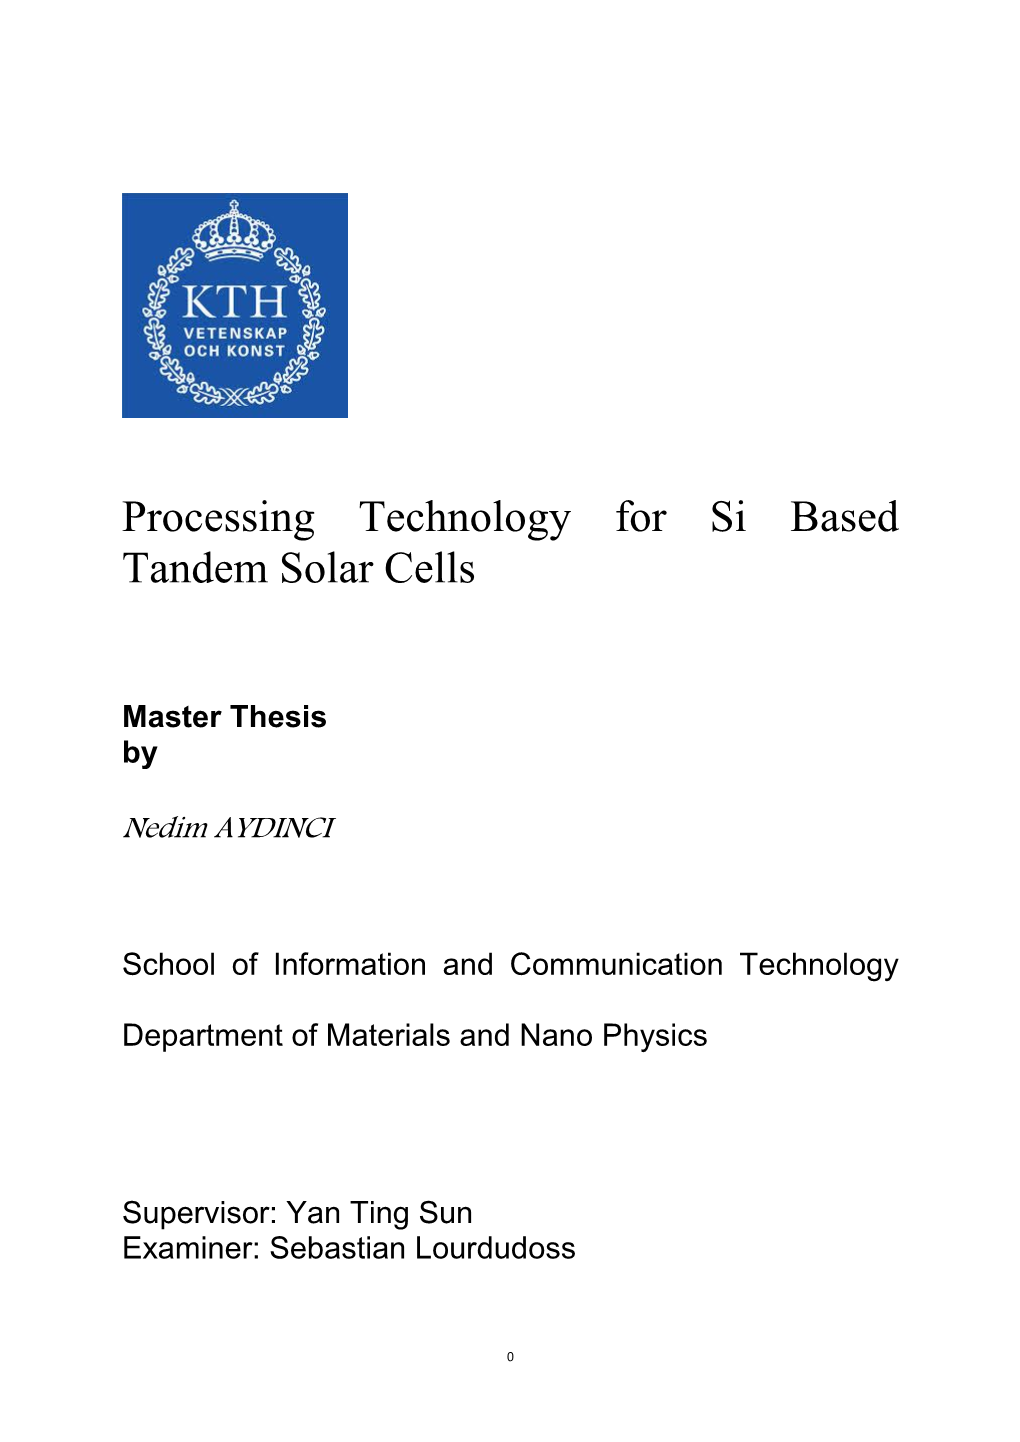 Processing Technology for Si Based Tandem Solar Cells